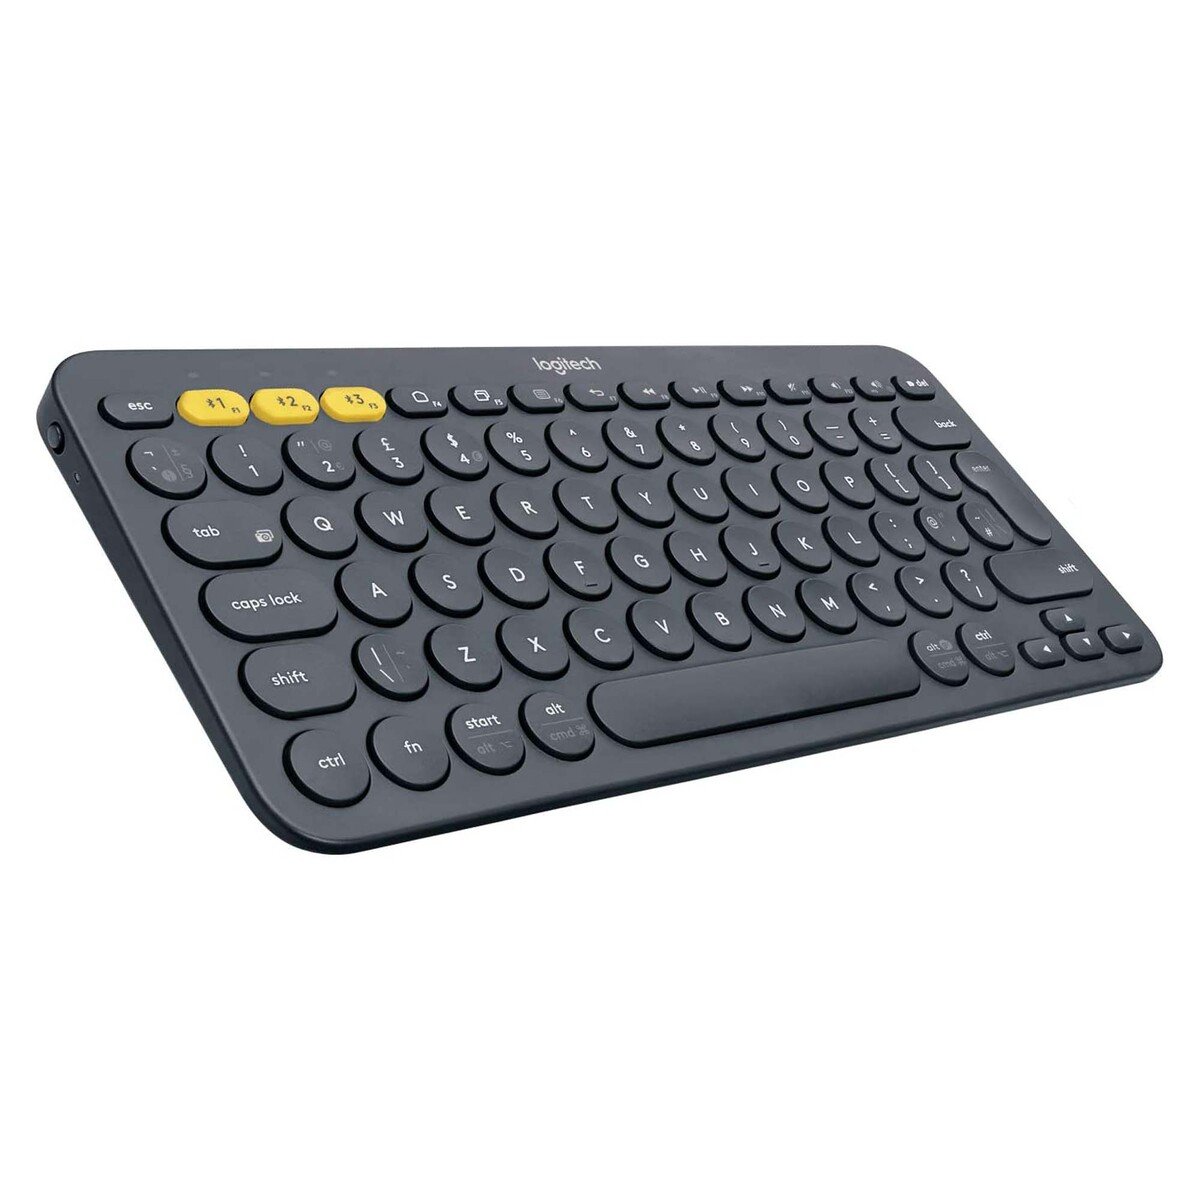 Logitech K380 Wireless Multi-Device Keyboard for Windows, Apple iOS, Apple TV, Android or Chrome, Bluetooth, Compact Space-Saving Design